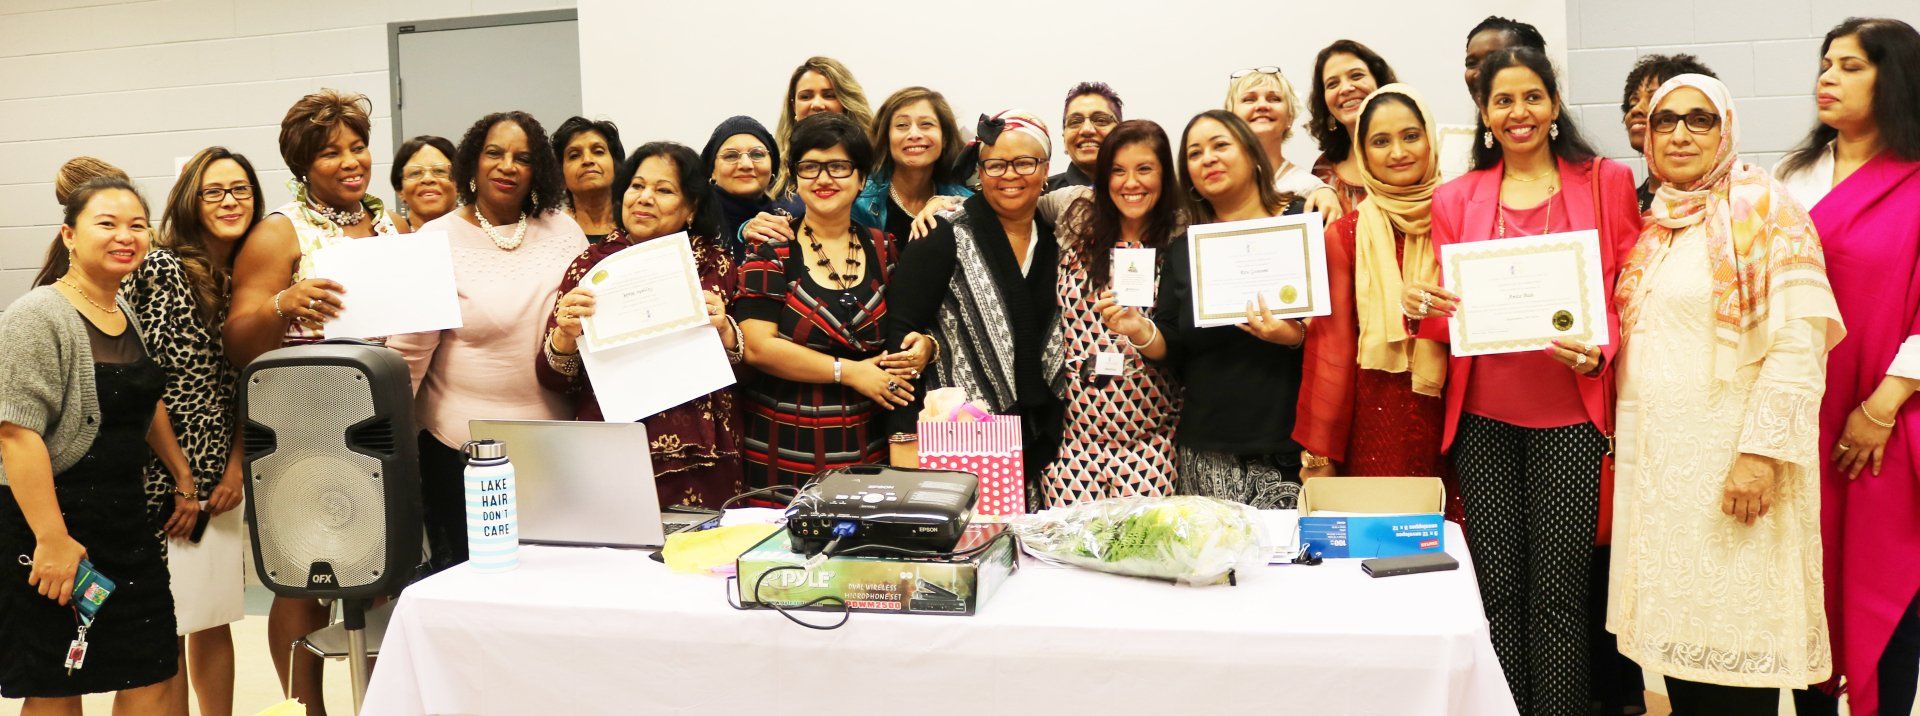 a group of women are standing around a table holding certificates .